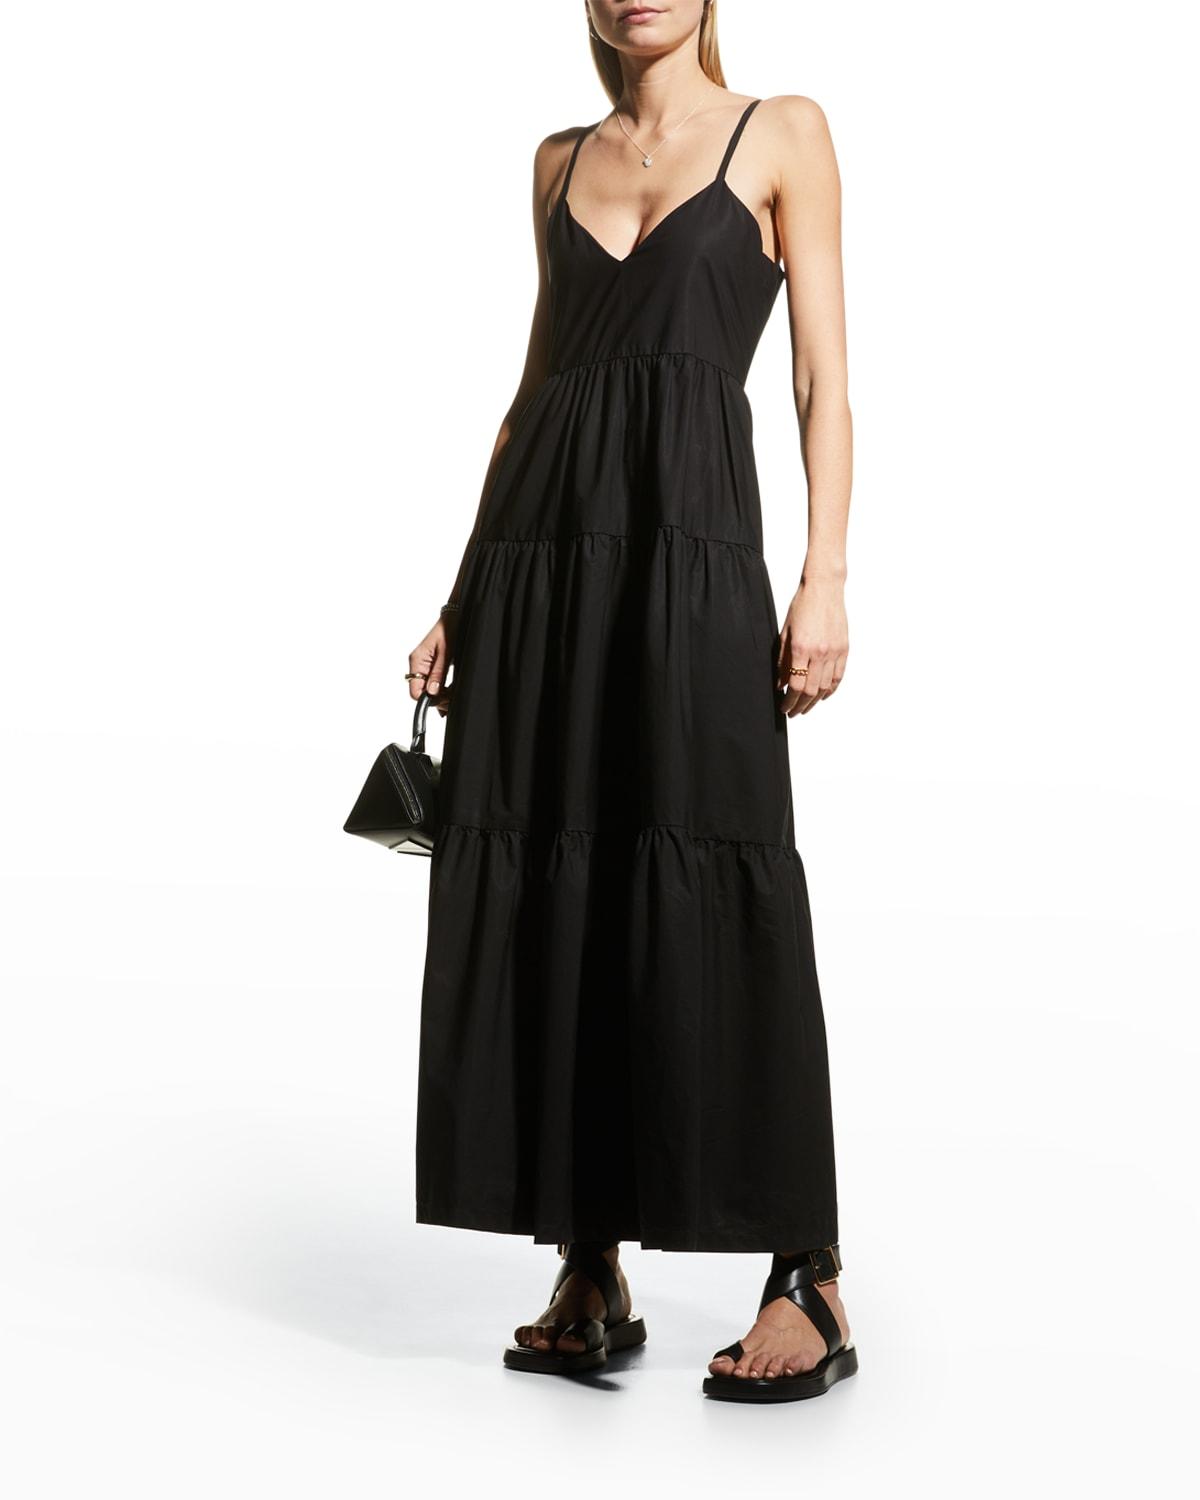 Rohe Milou Tiered Maxi Dress in Black | Lyst